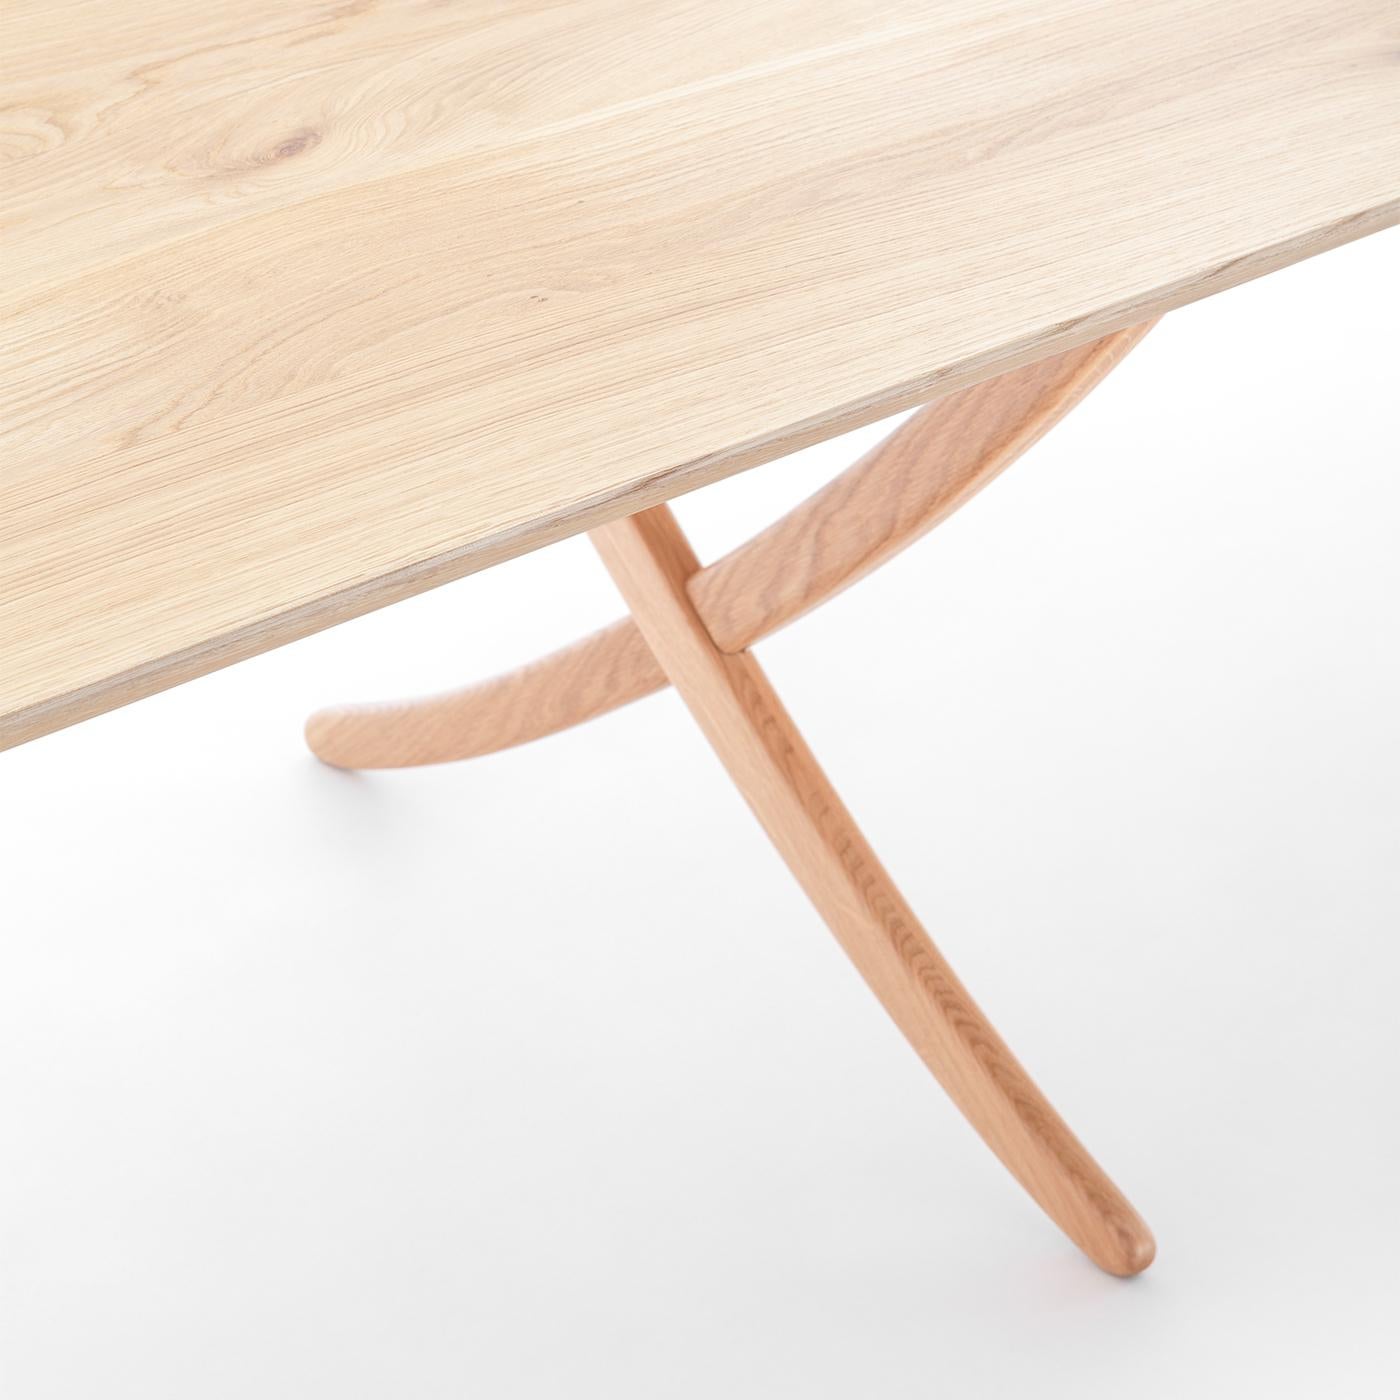 Lightweight lines exuding a delicate flair define the sophisticated character of this dining table, an elegant accent to a contemporary setting. Inspired by Scandinavian design and interpreted in a sleek Italian artisan aesthetic, it is handcrafted